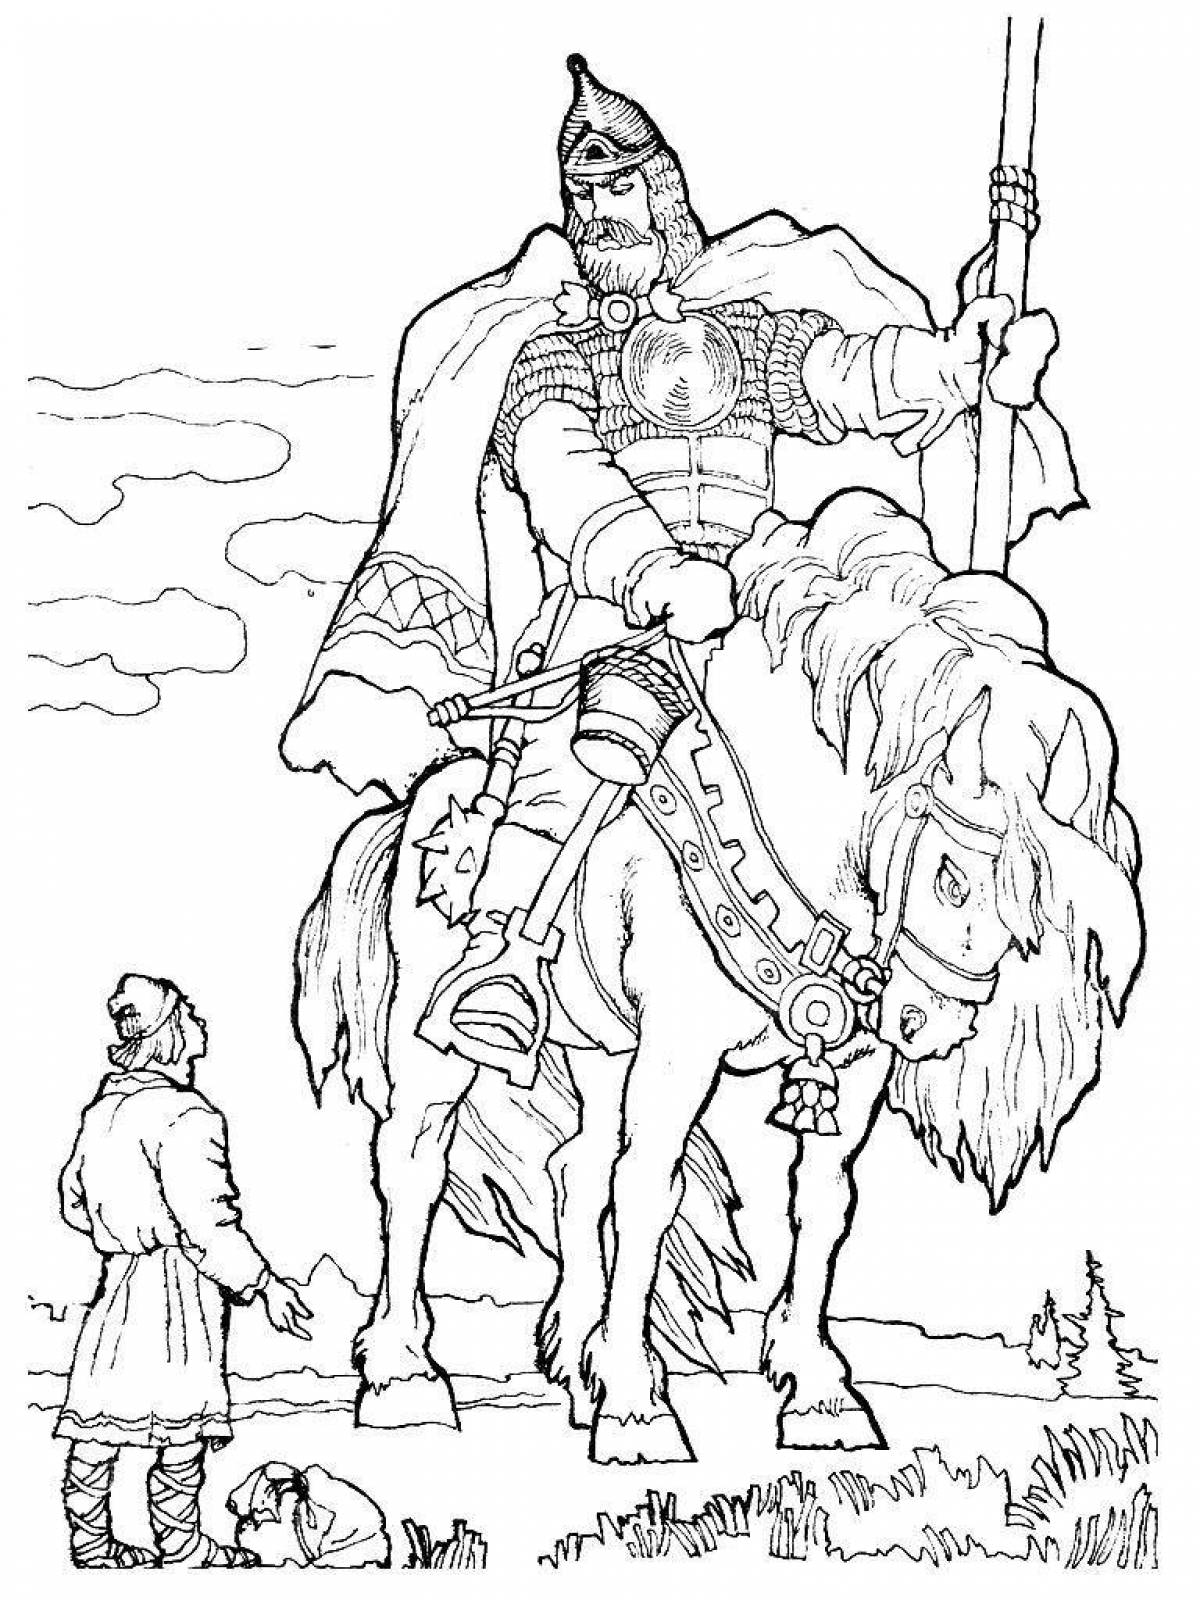 Coloring page exalted heroes of russia